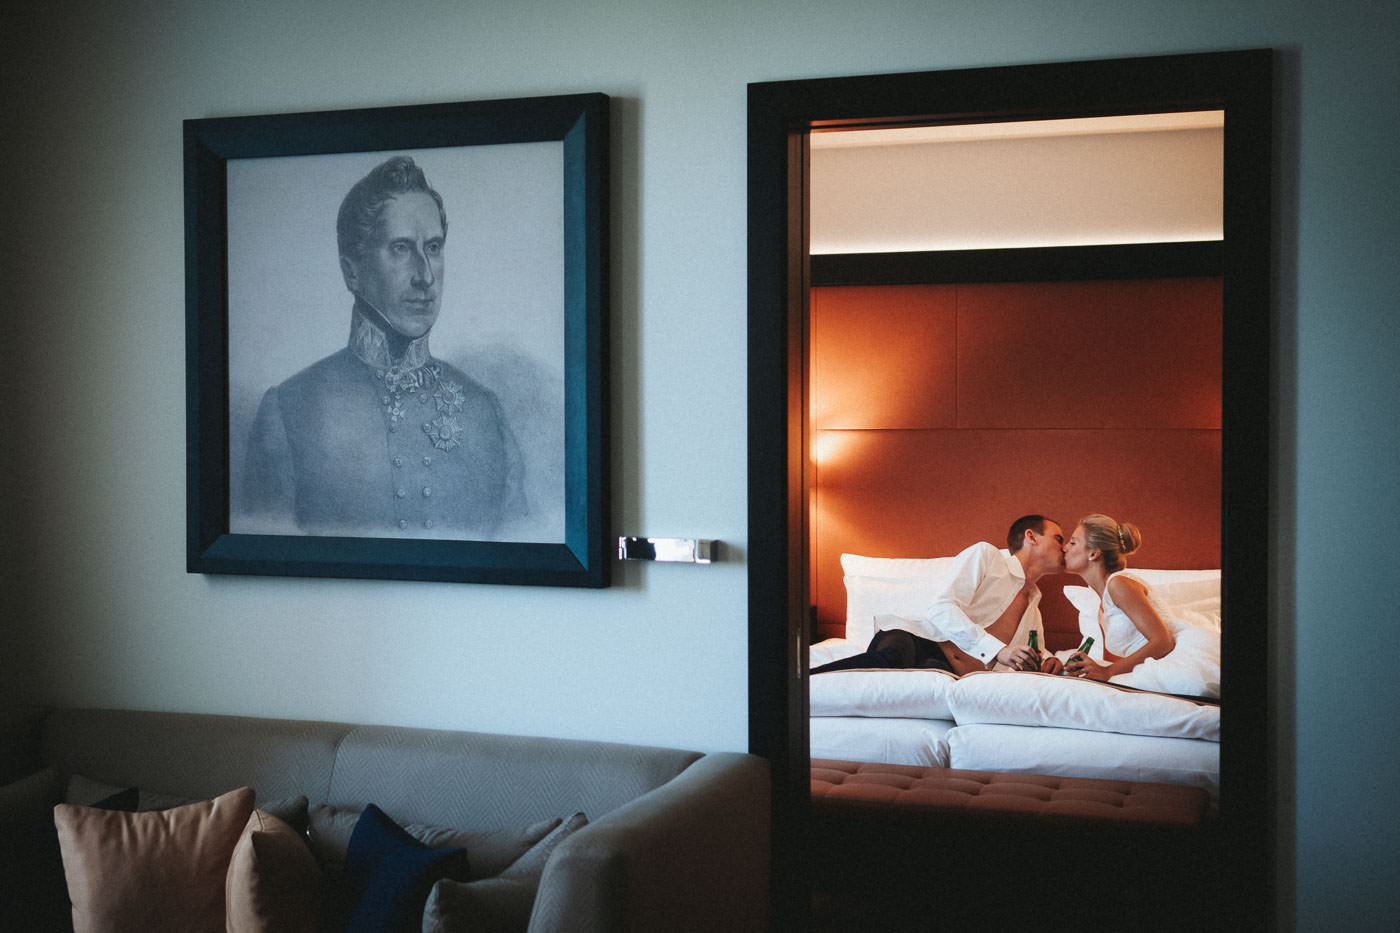 Bride and groom lying on bed in hotel room kissing, his shirt open, both with beer bottle in hand, Steigenberger Hotel Bad Homburg